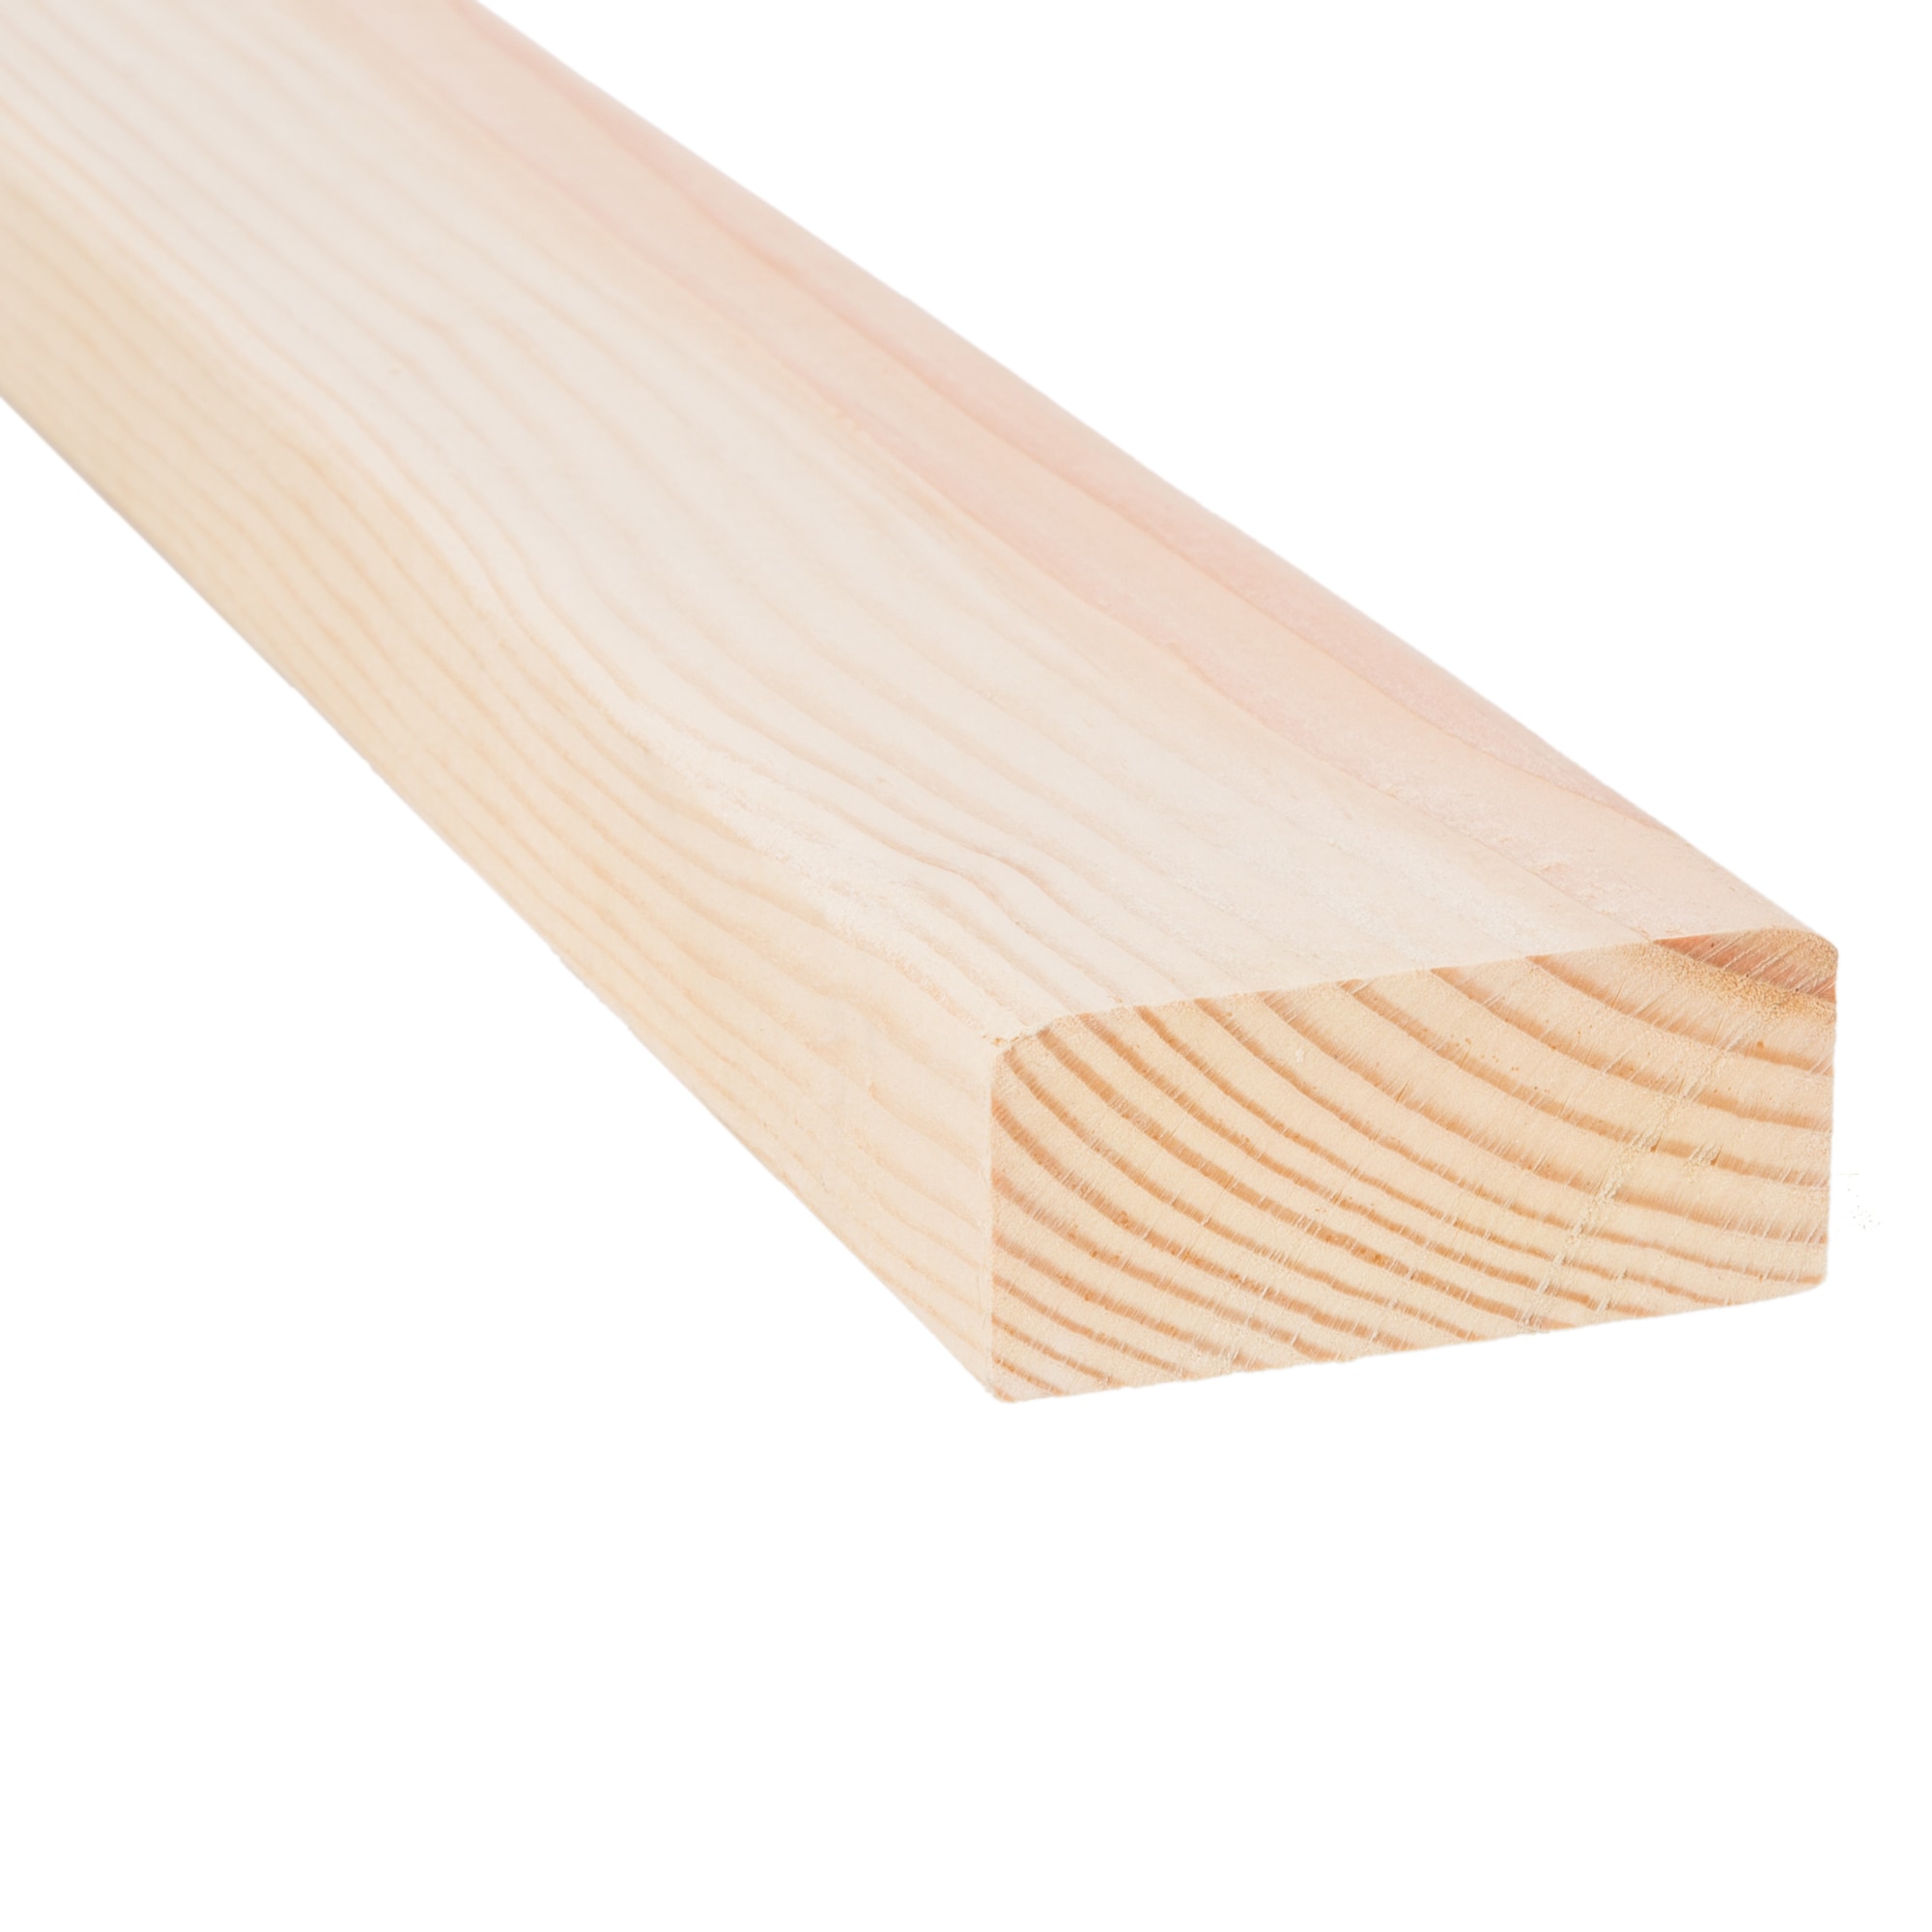 2-in x 4-in Dimensional Lumber at